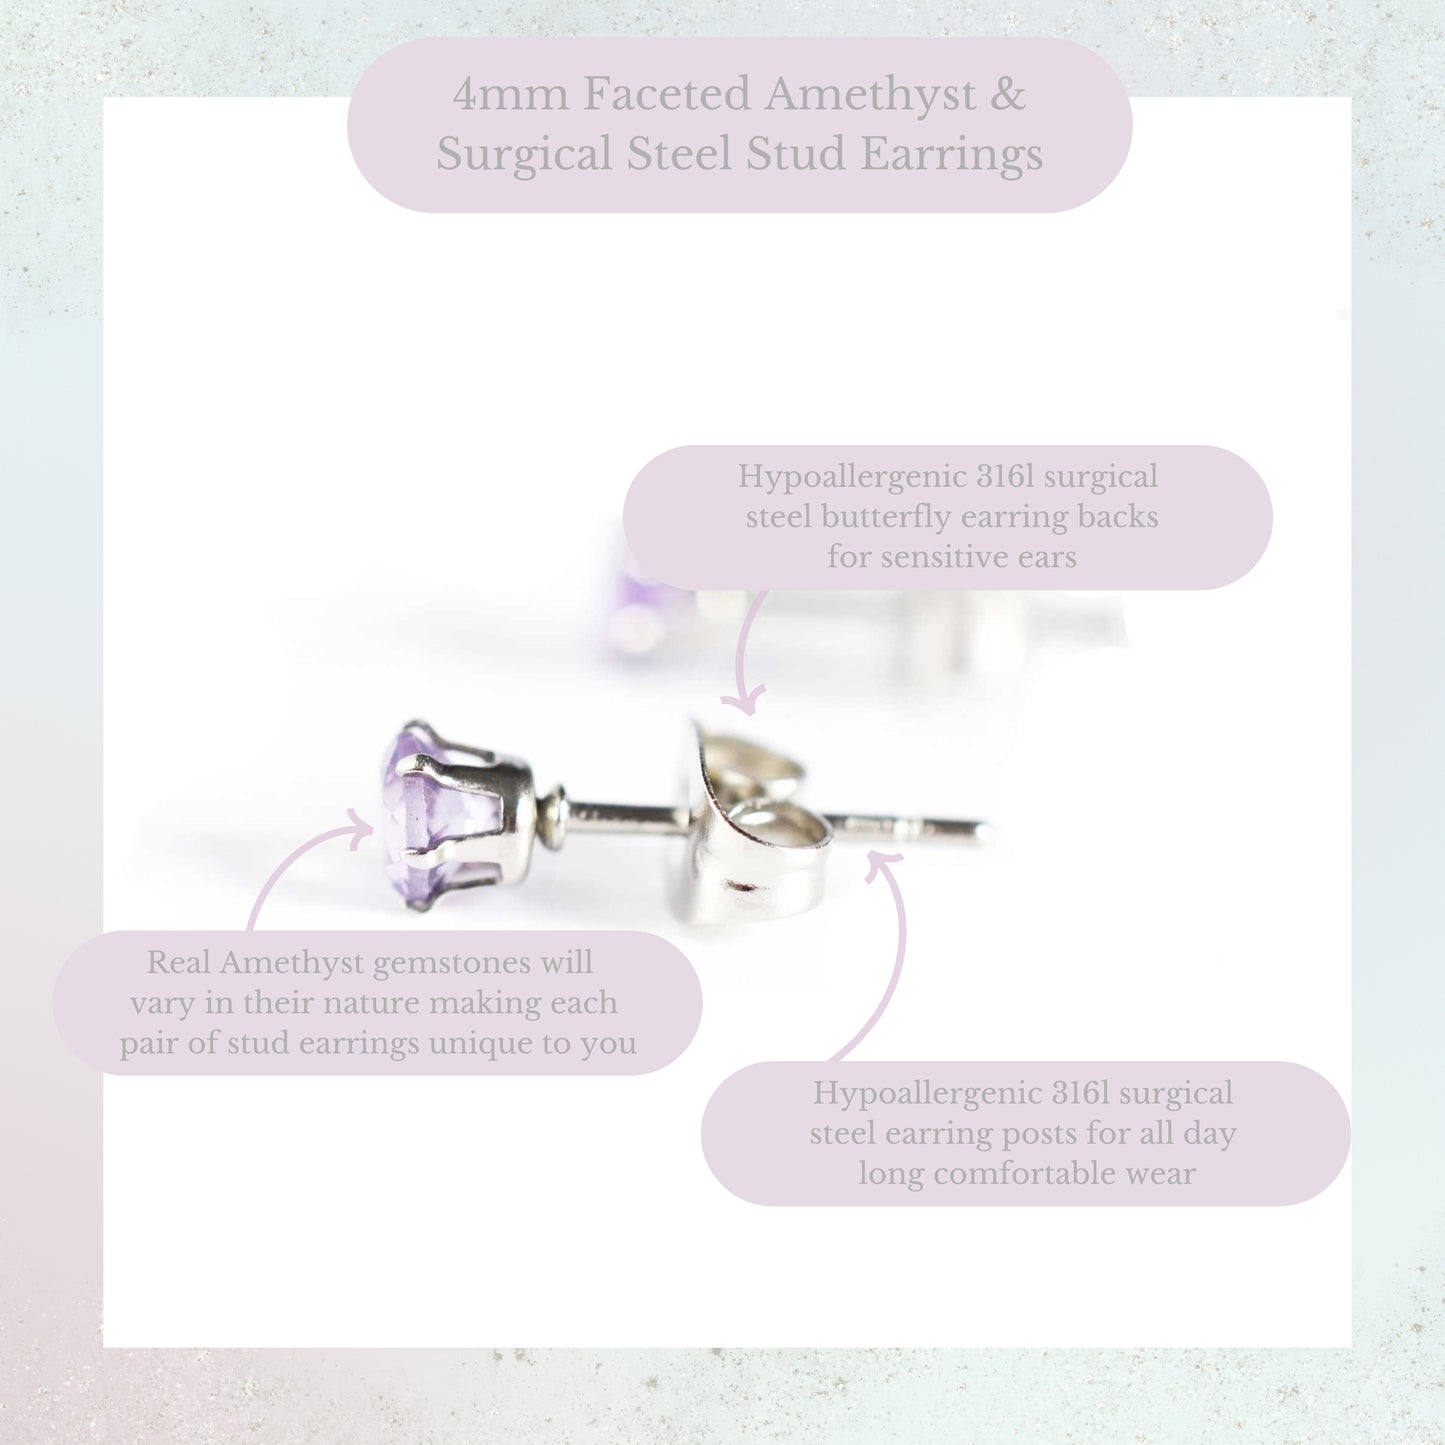 Product information graphic for 4mm faceted Amethyst stud earrings